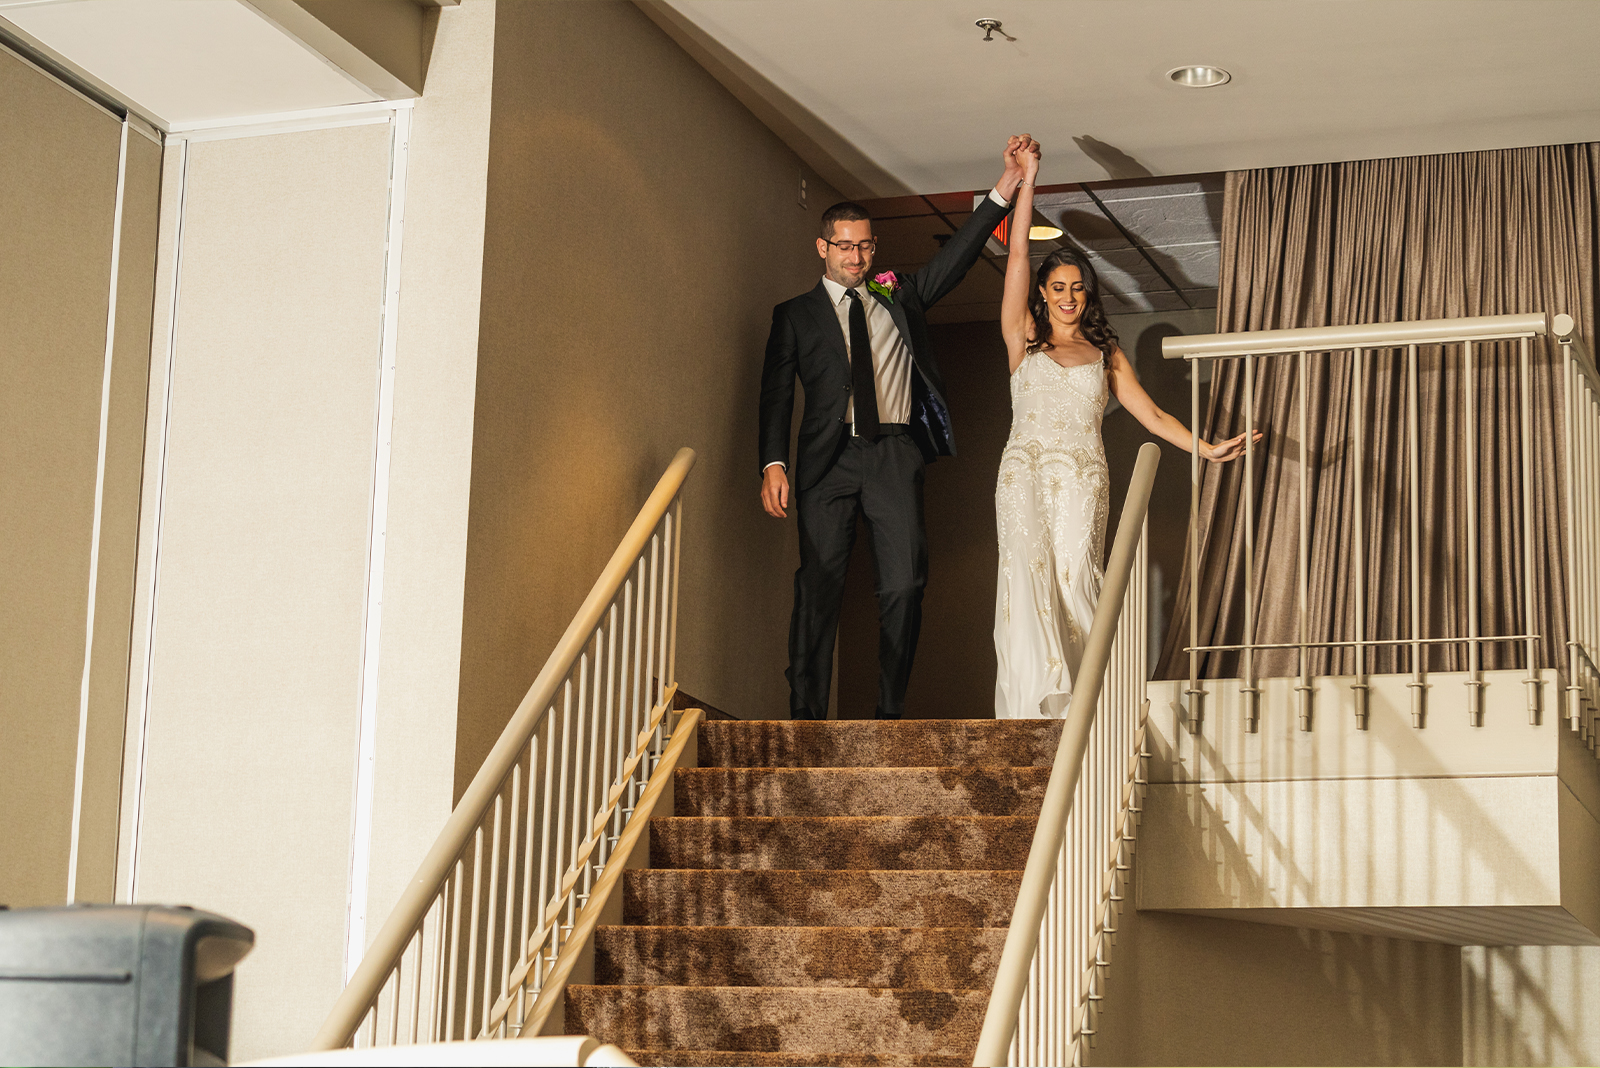 Bride and groom cheering, bridal party entrance, staircase, happy, candid wedding photo, classy wedding reception at Landerhaven, Mayfield Heights OH